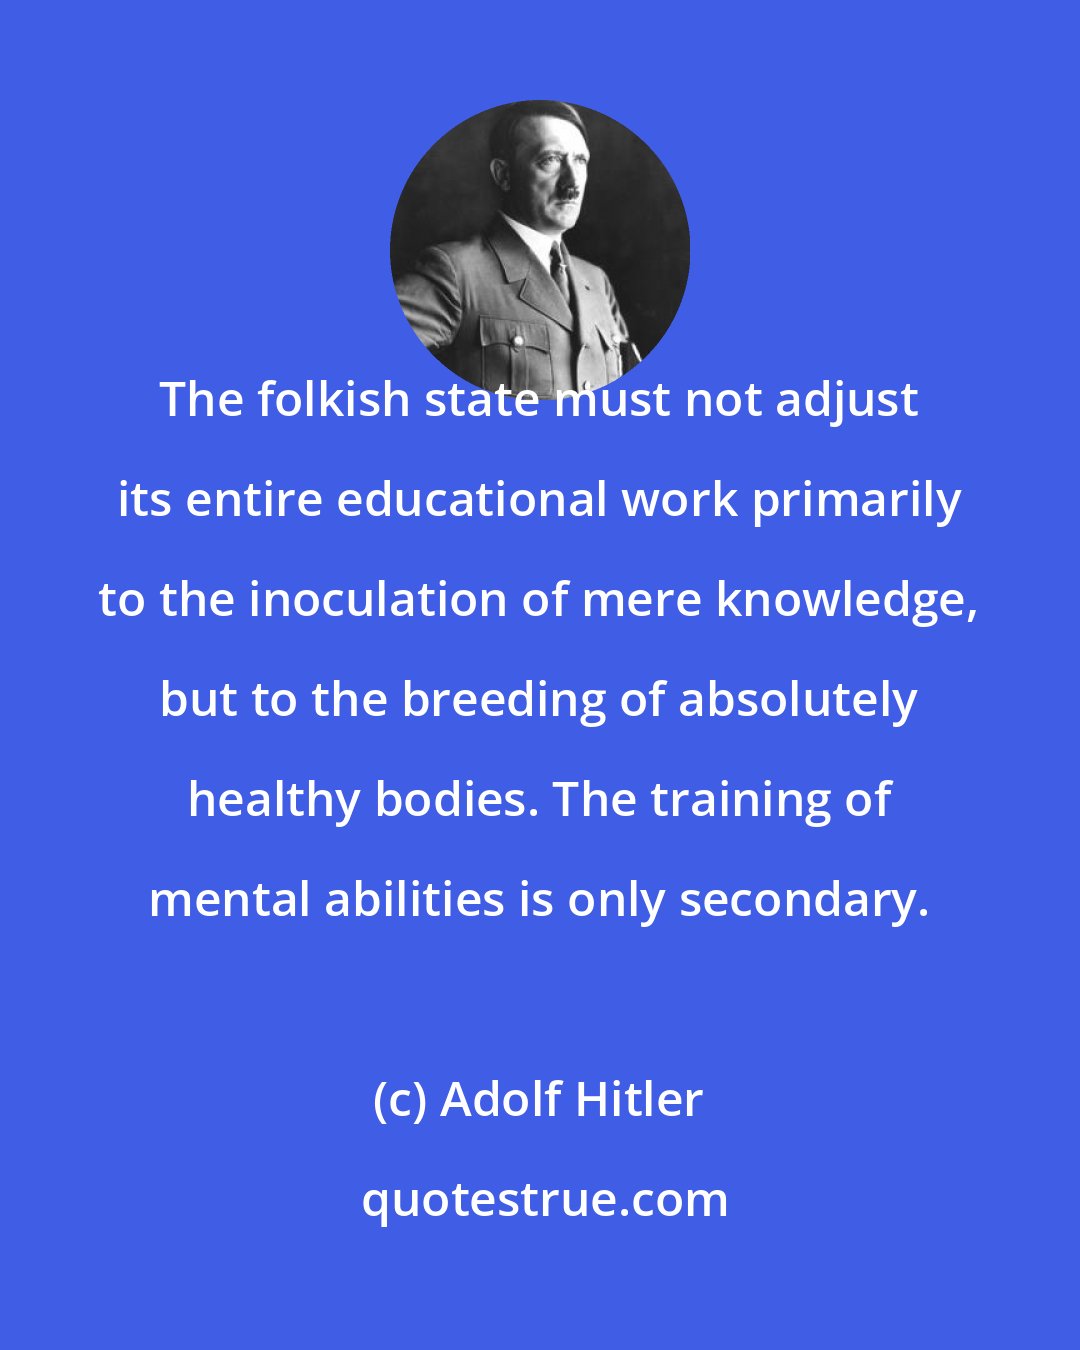 Adolf Hitler: The folkish state must not adjust its entire educational work primarily to the inoculation of mere knowledge, but to the breeding of absolutely healthy bodies. The training of mental abilities is only secondary.